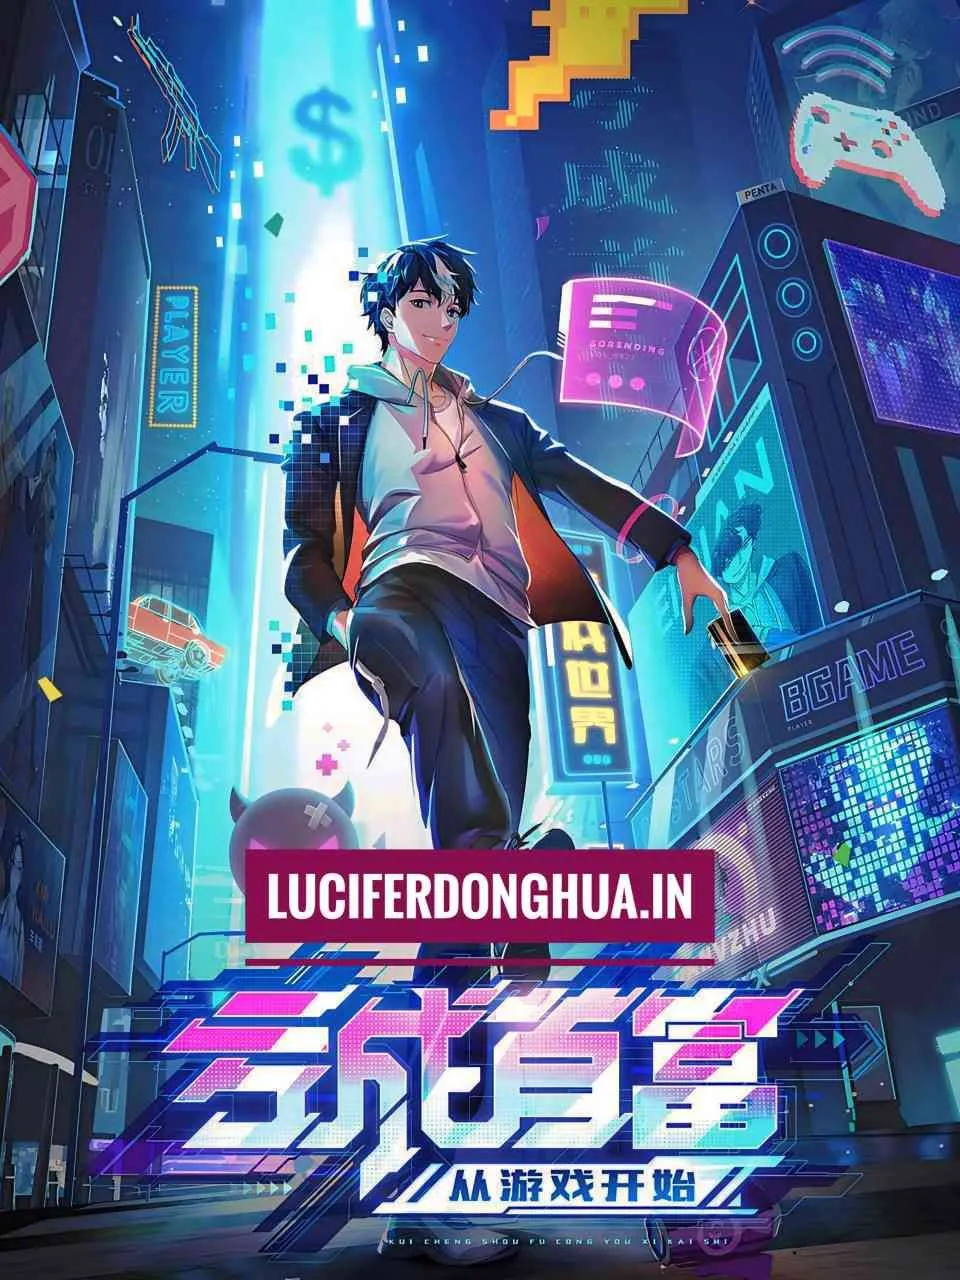 the richest man in game 2024 lcuifer donghua chnese anime 1